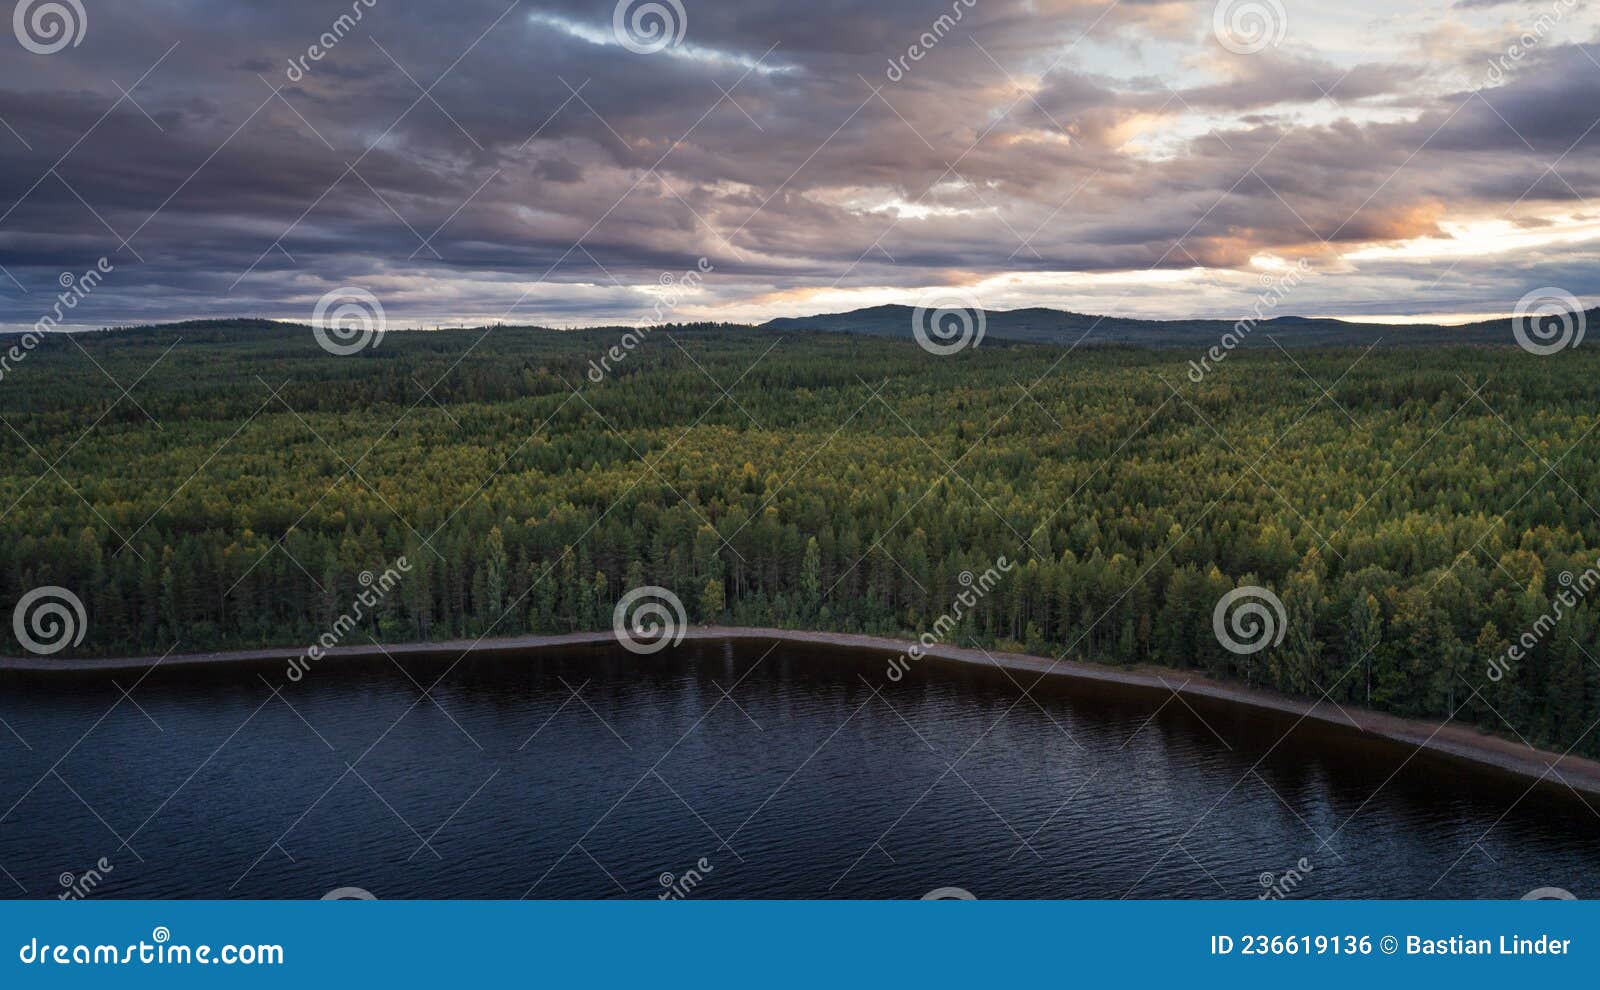 forest and lakeshore at lake siljan from above during sunset in dalarna, sweden